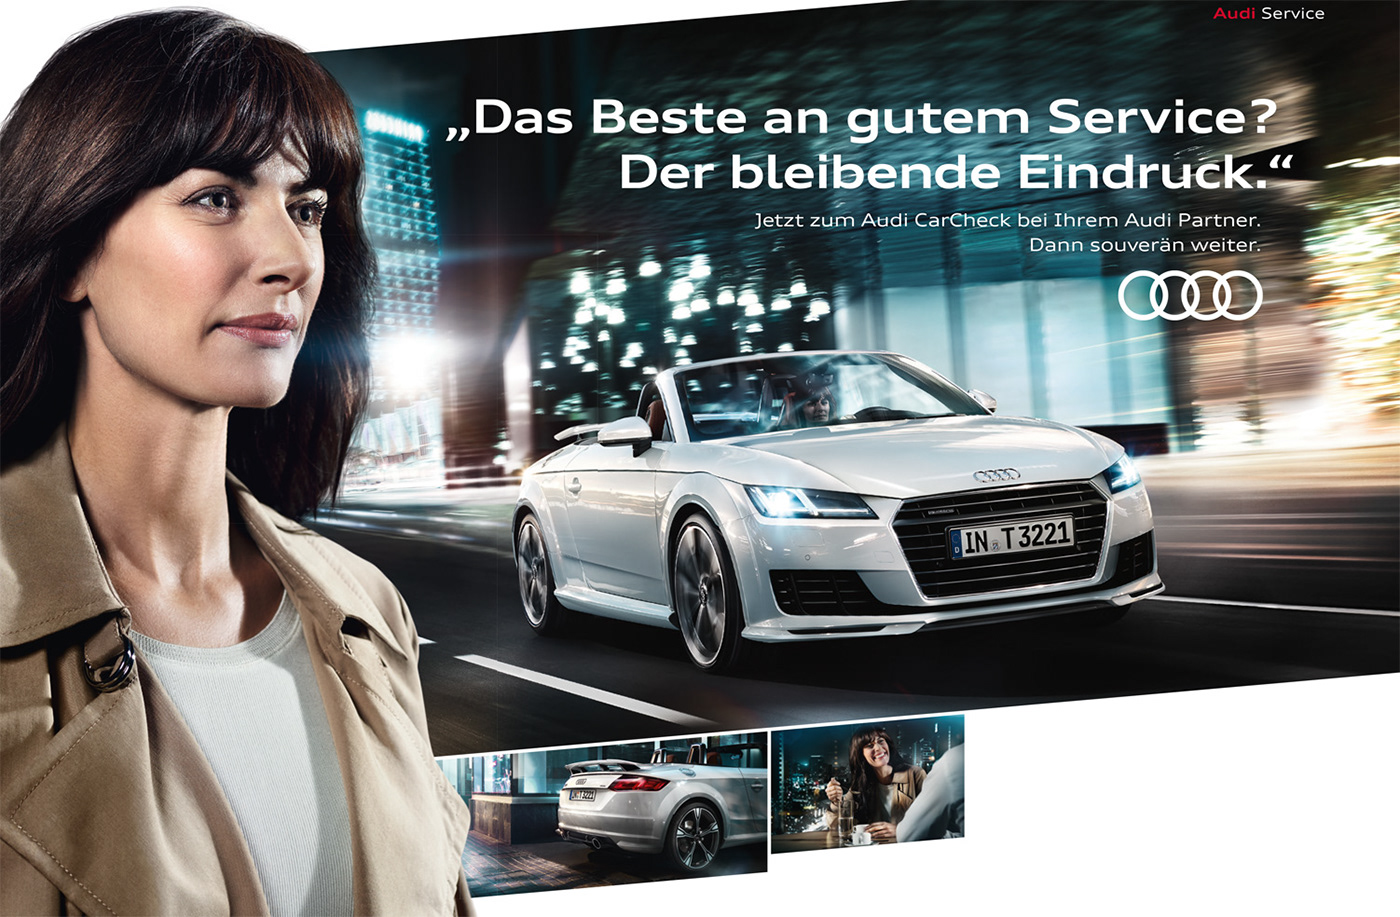 Audi Advertising  Carshoot agency carphotography creative photoshop campaign